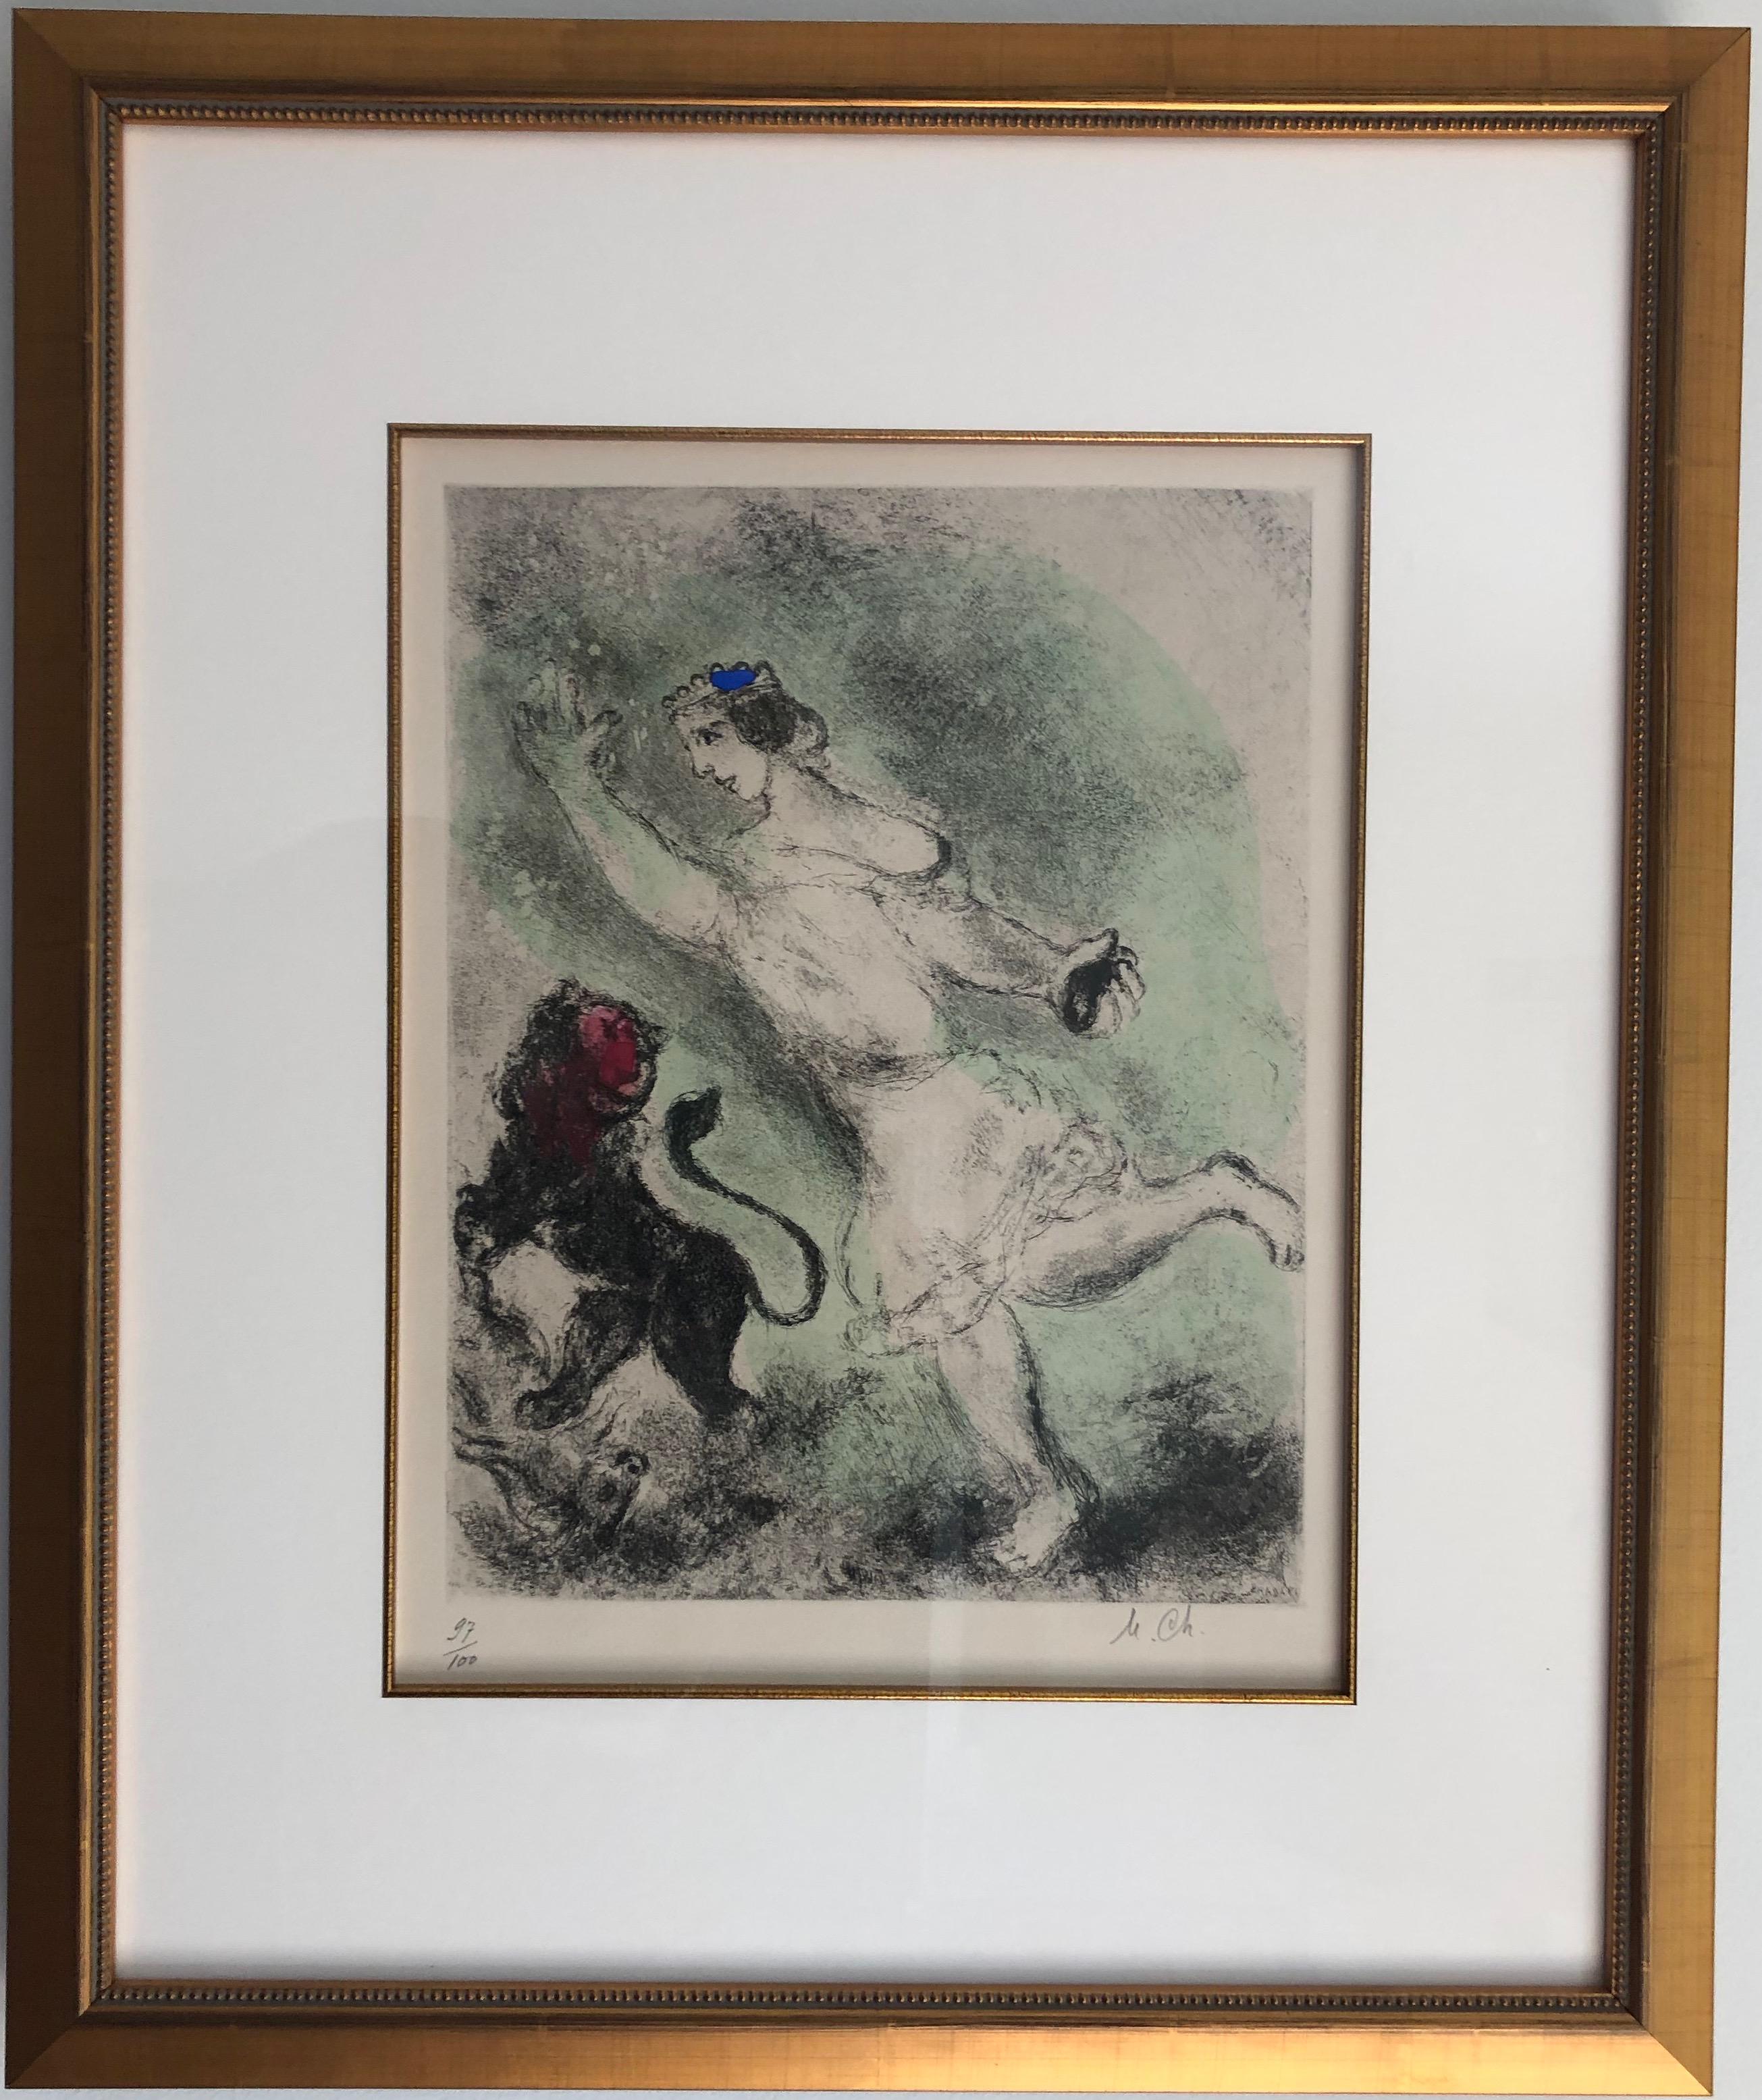  

CHAGALL, MARC
(1887 – 1985)

"David and the Lion"


From The Bible Suite – Sourlier/Vollard 260
Original hand-colored etching on wove paper, c. 1956
Initialed in pencil and lower, lower right 
This impression 97 from the edition of 100
Image